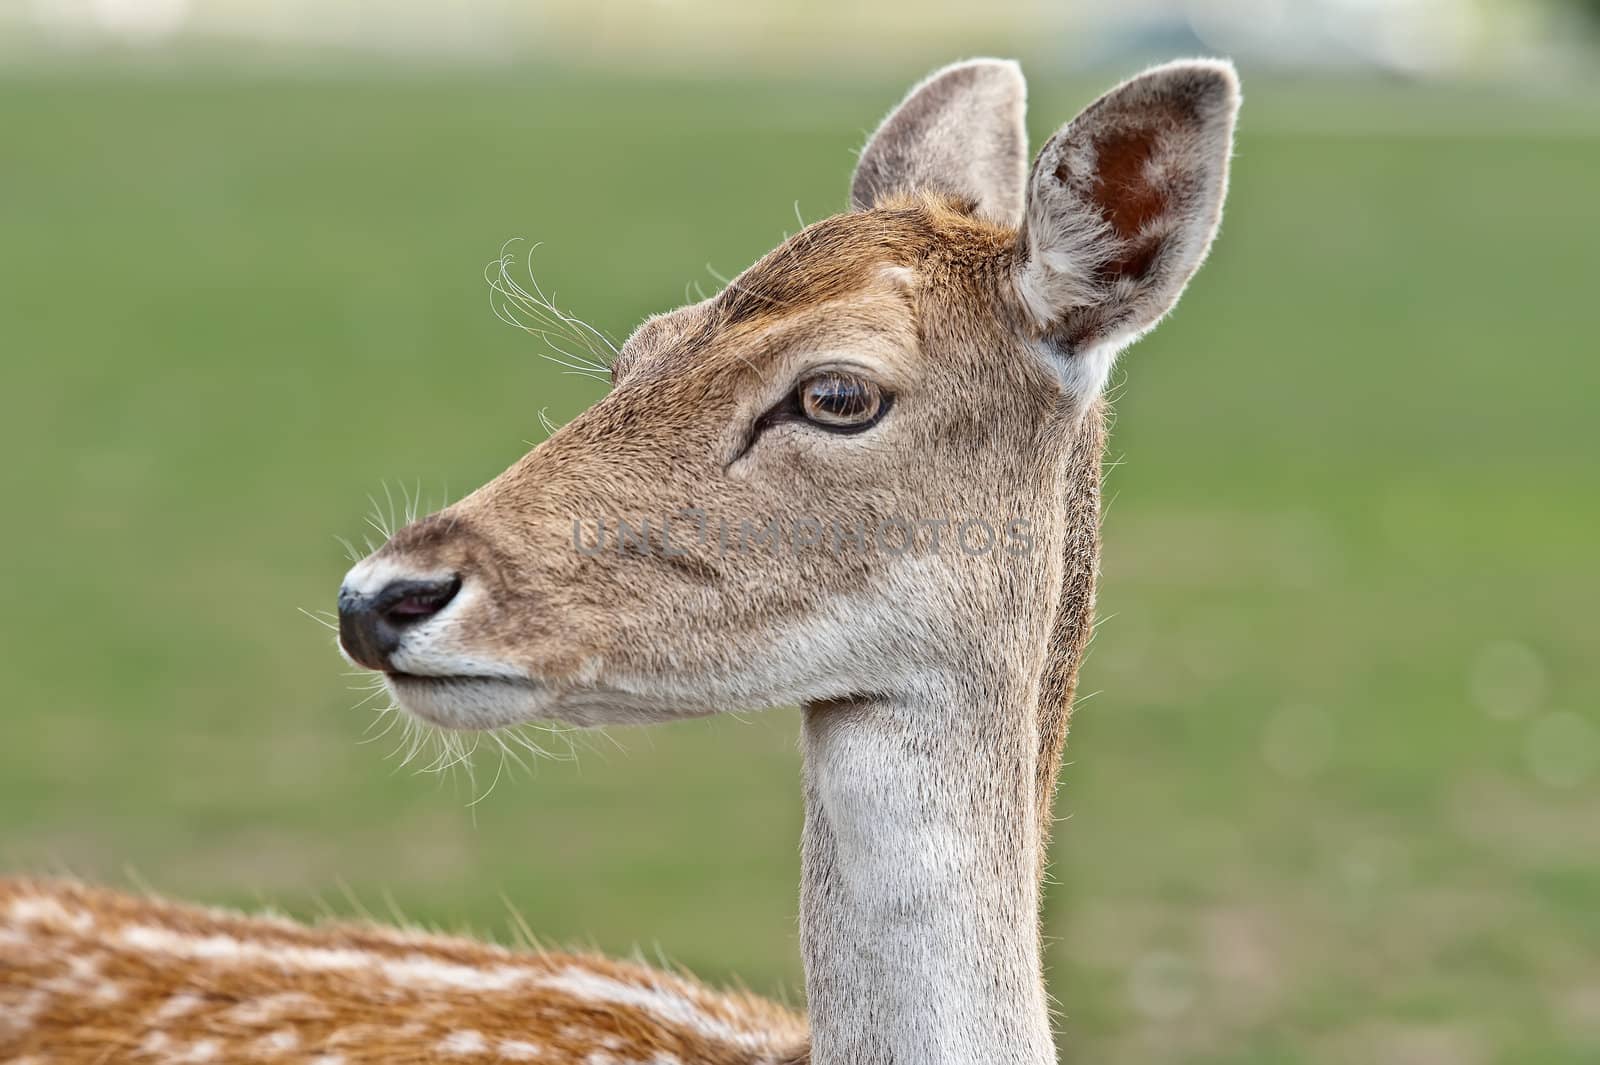 Portrait of a white-tailed deer.